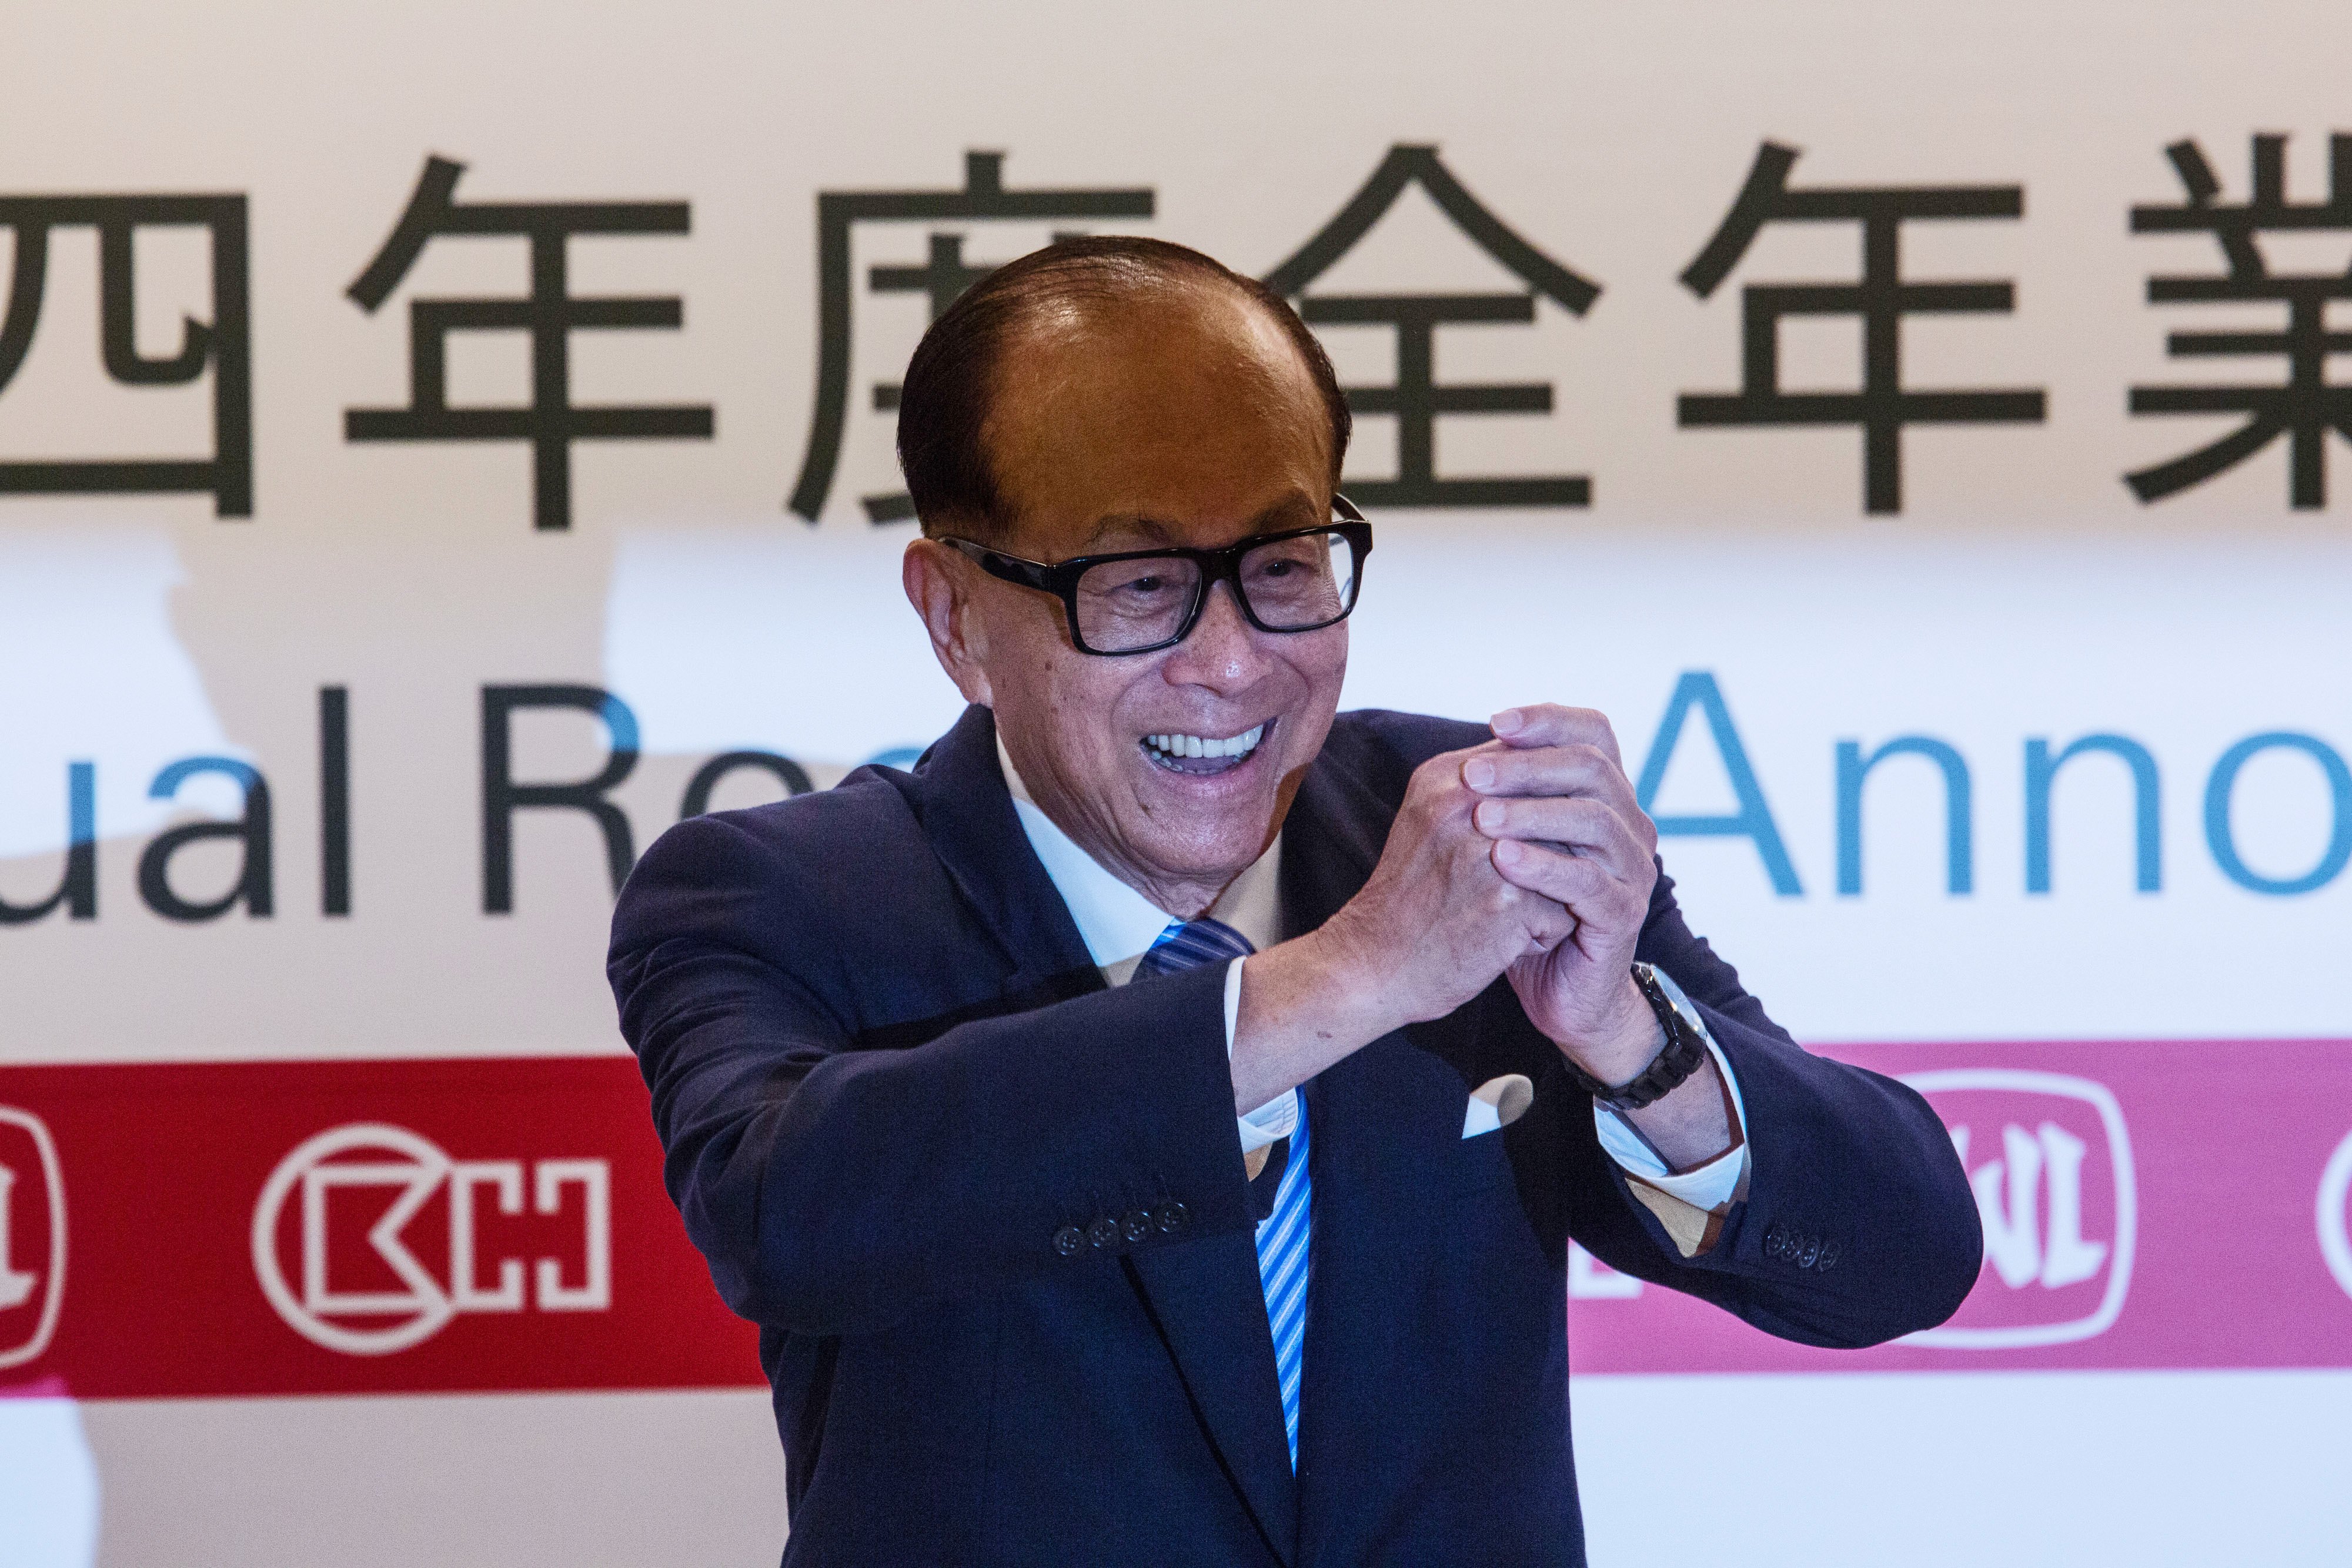 Hutchison Whampoa chairman Li Ka-shing clasps his hands during a conference. Photo: Bloomberg